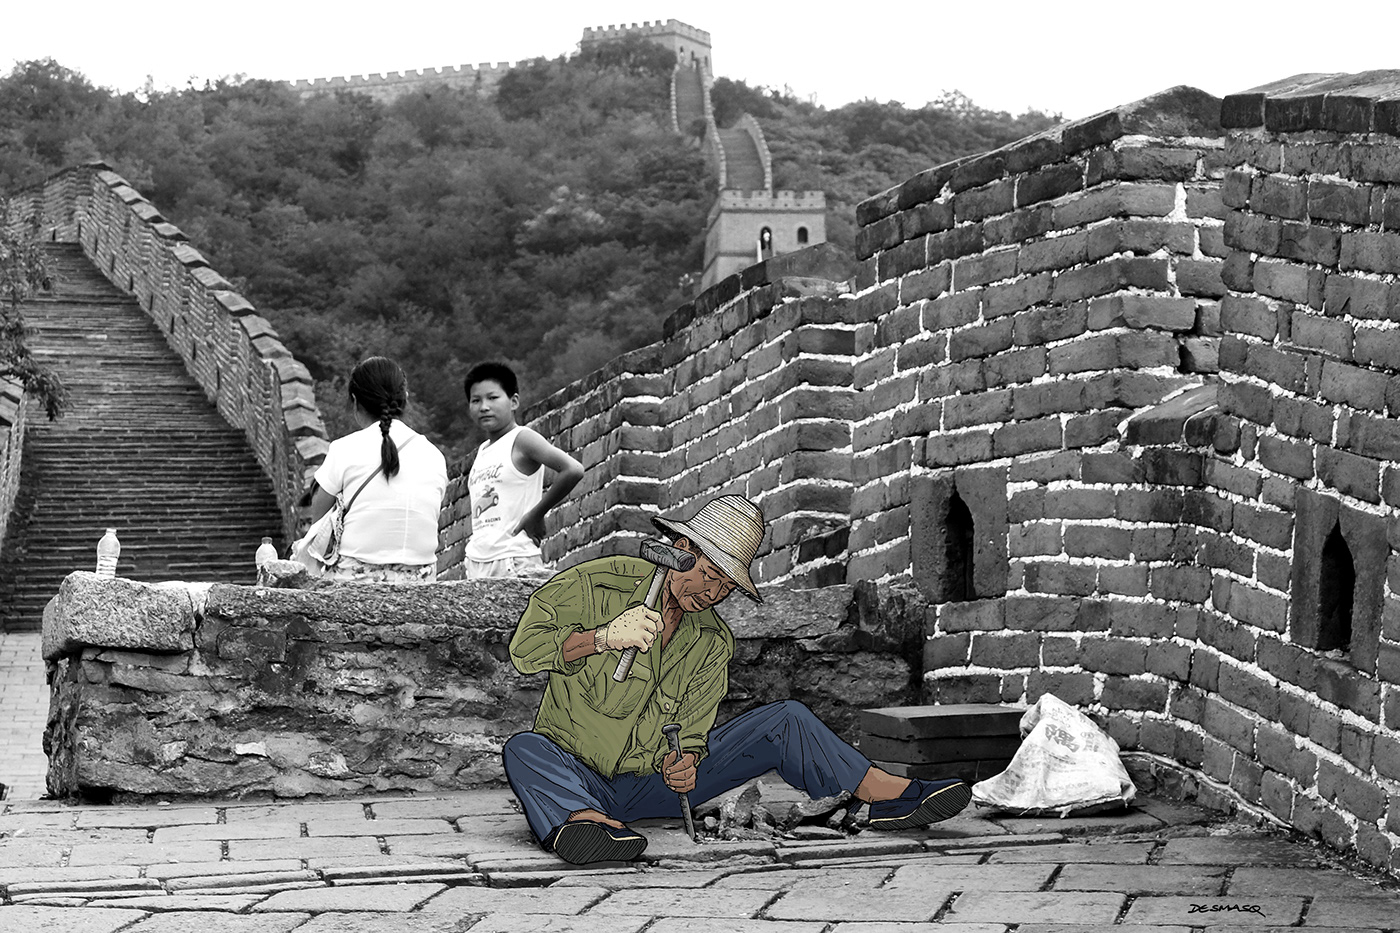 beijing china ILLUSTRATION  Digital Art  Photography  pen and ink Drawing  portrait